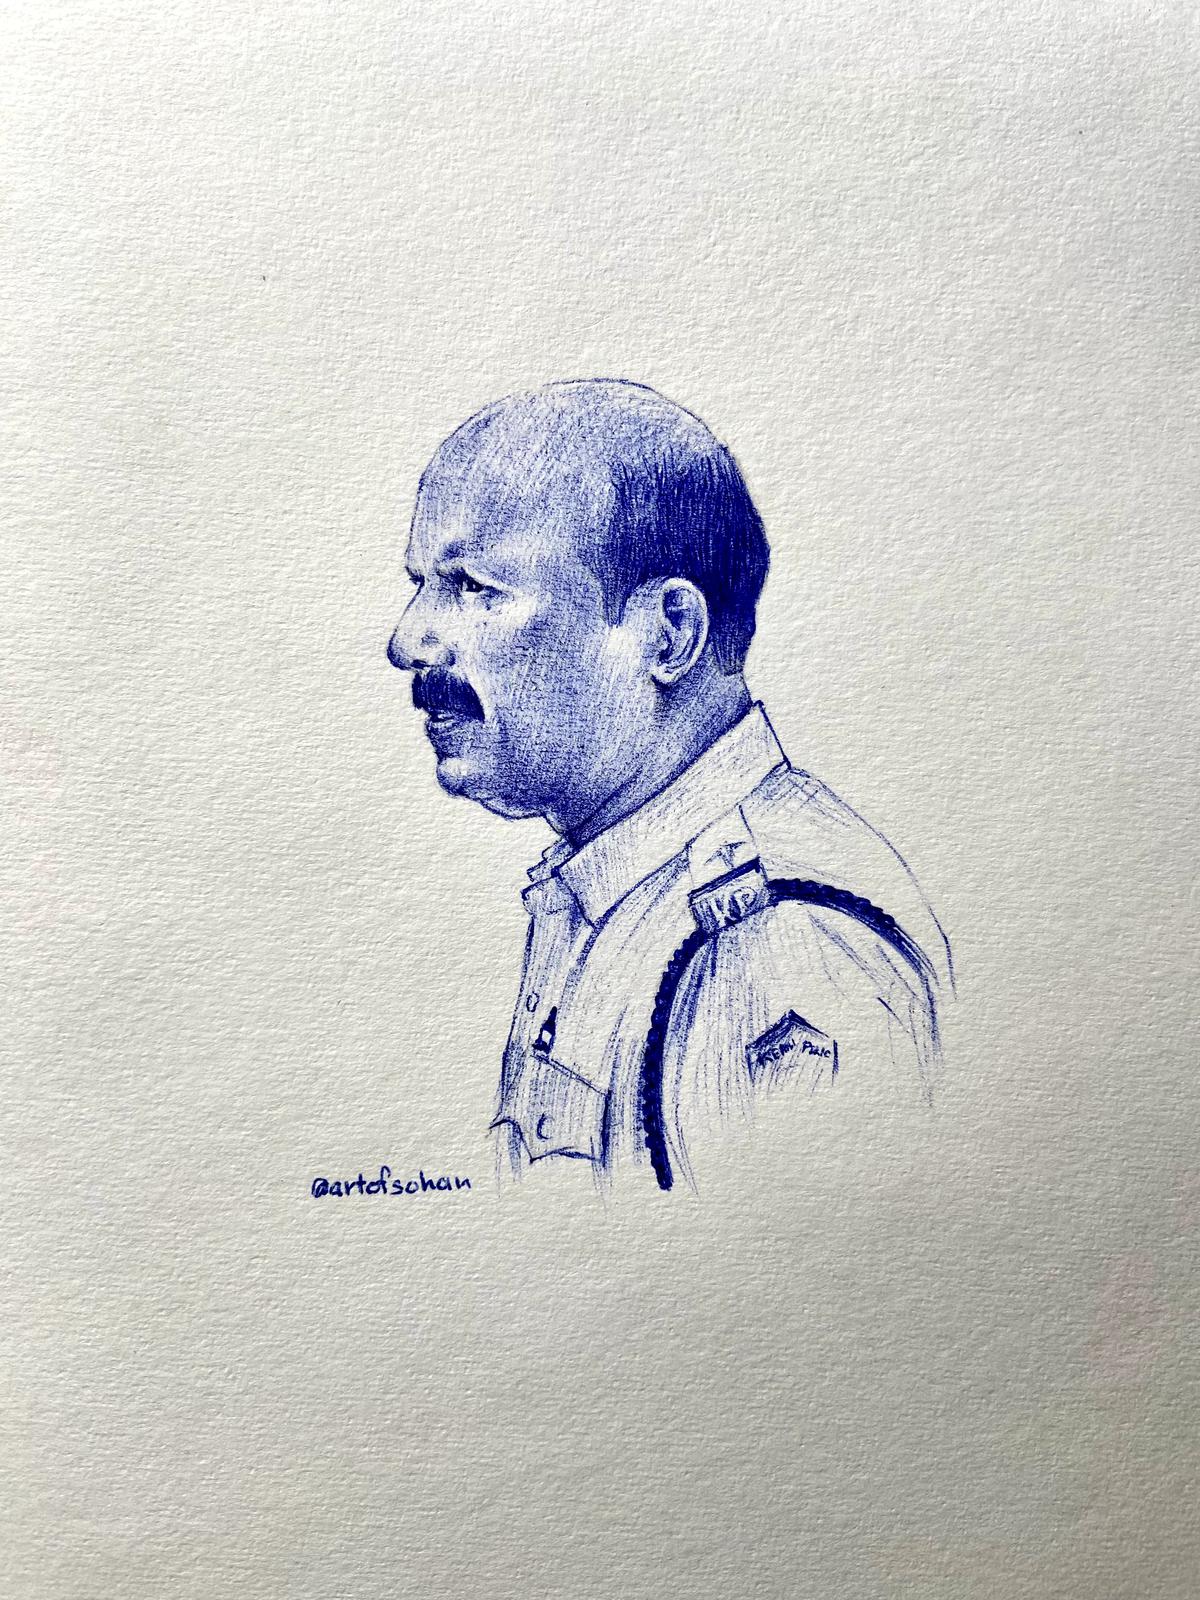 The portrait of a police man by Sohan VK 